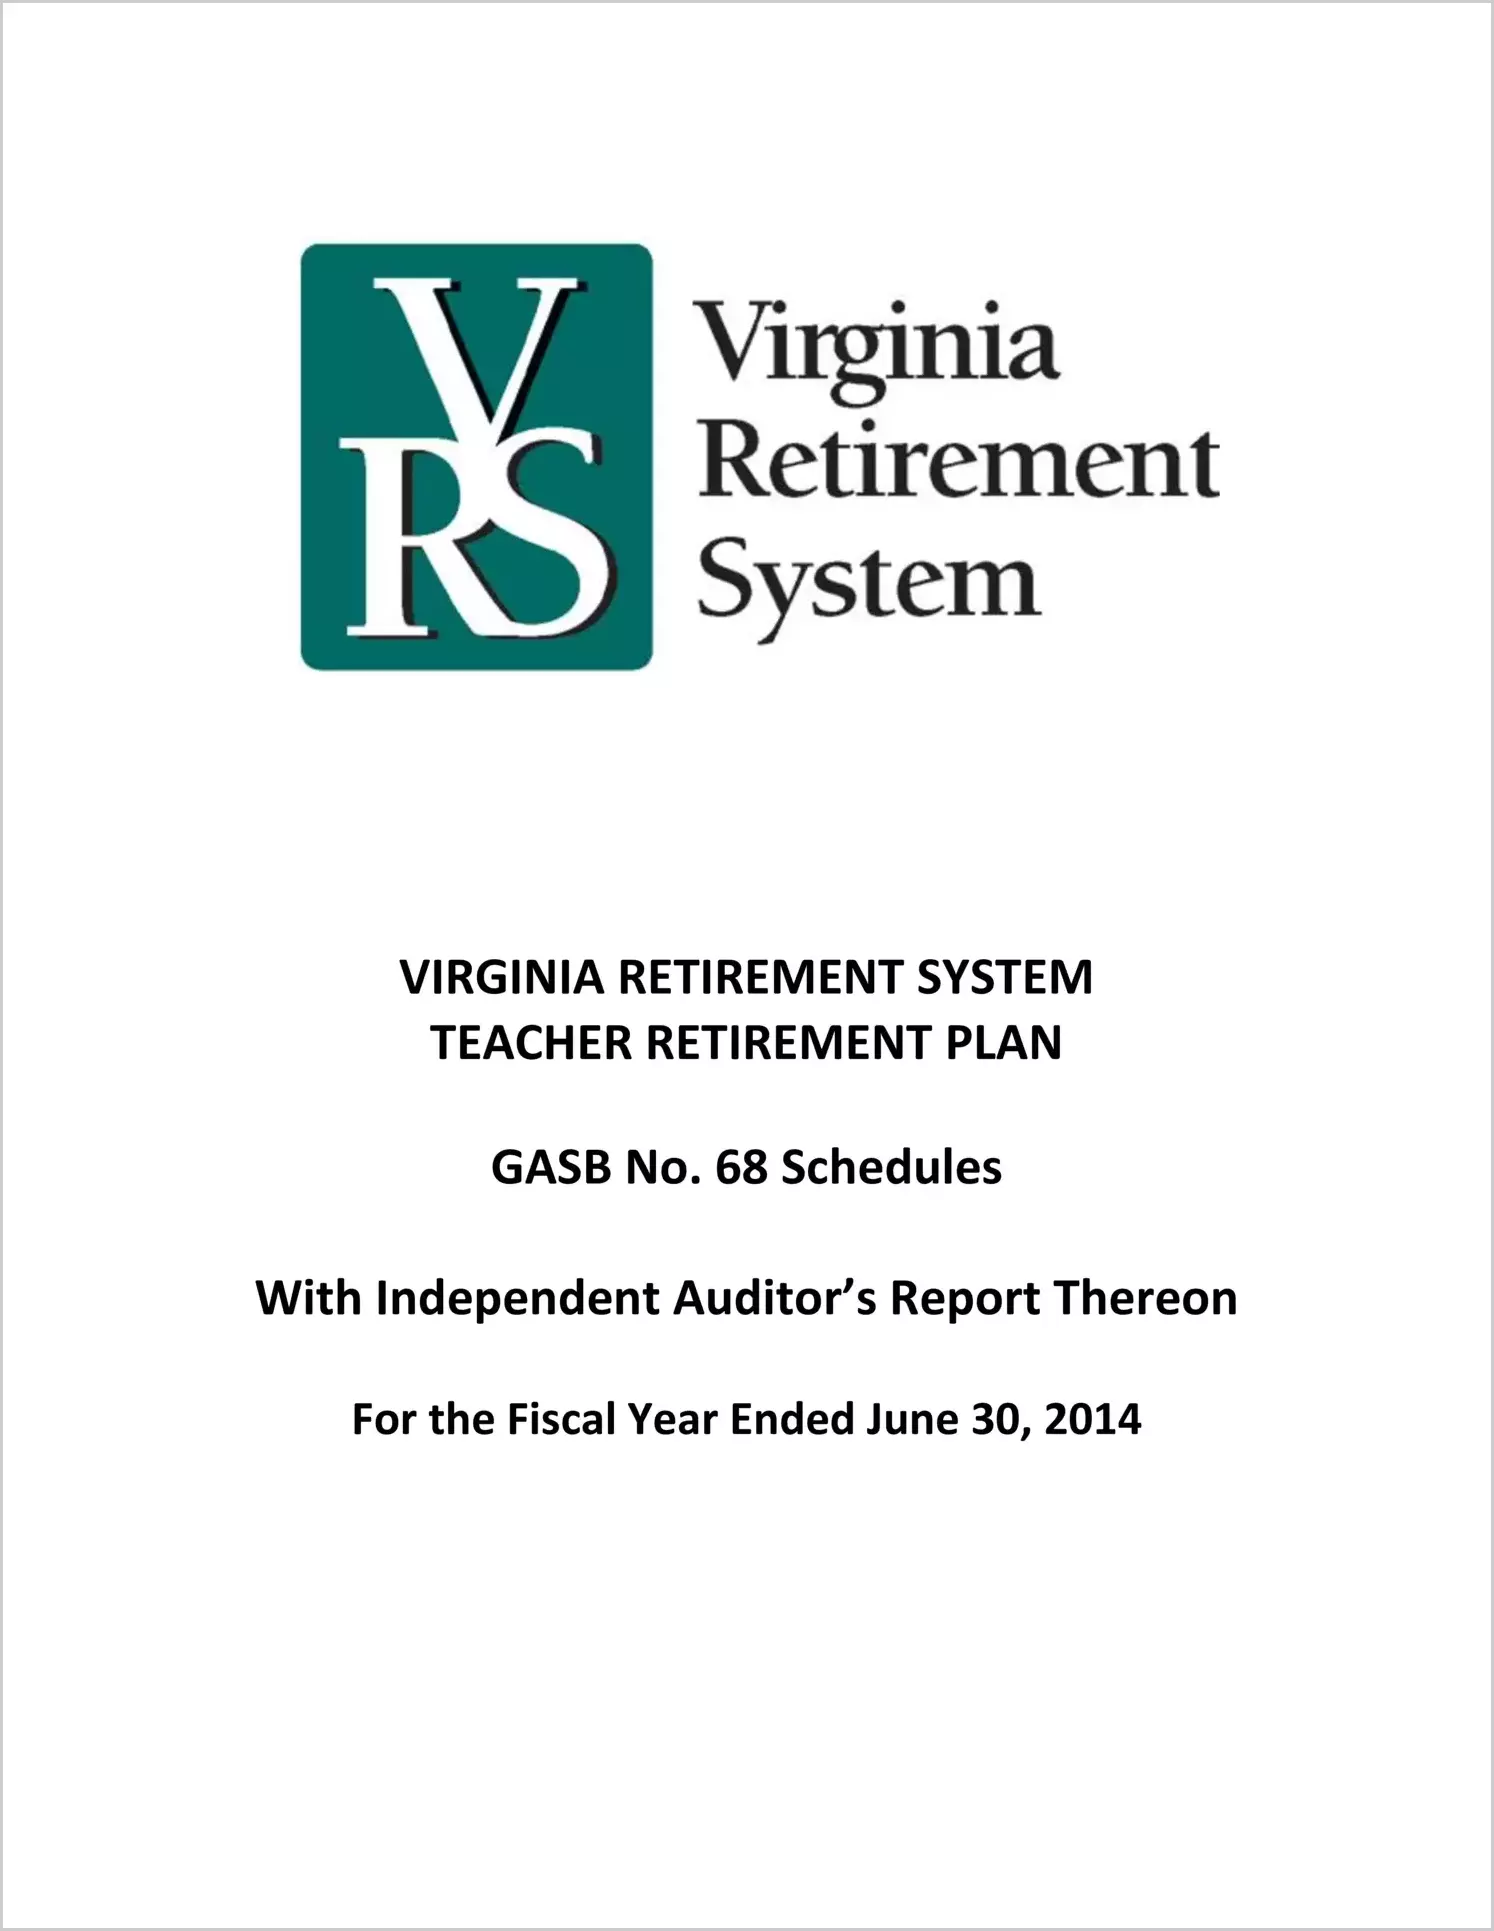 GASB 68 Schedule - Teacher Retirement Plan for the fiscal year ended June 30, 2014